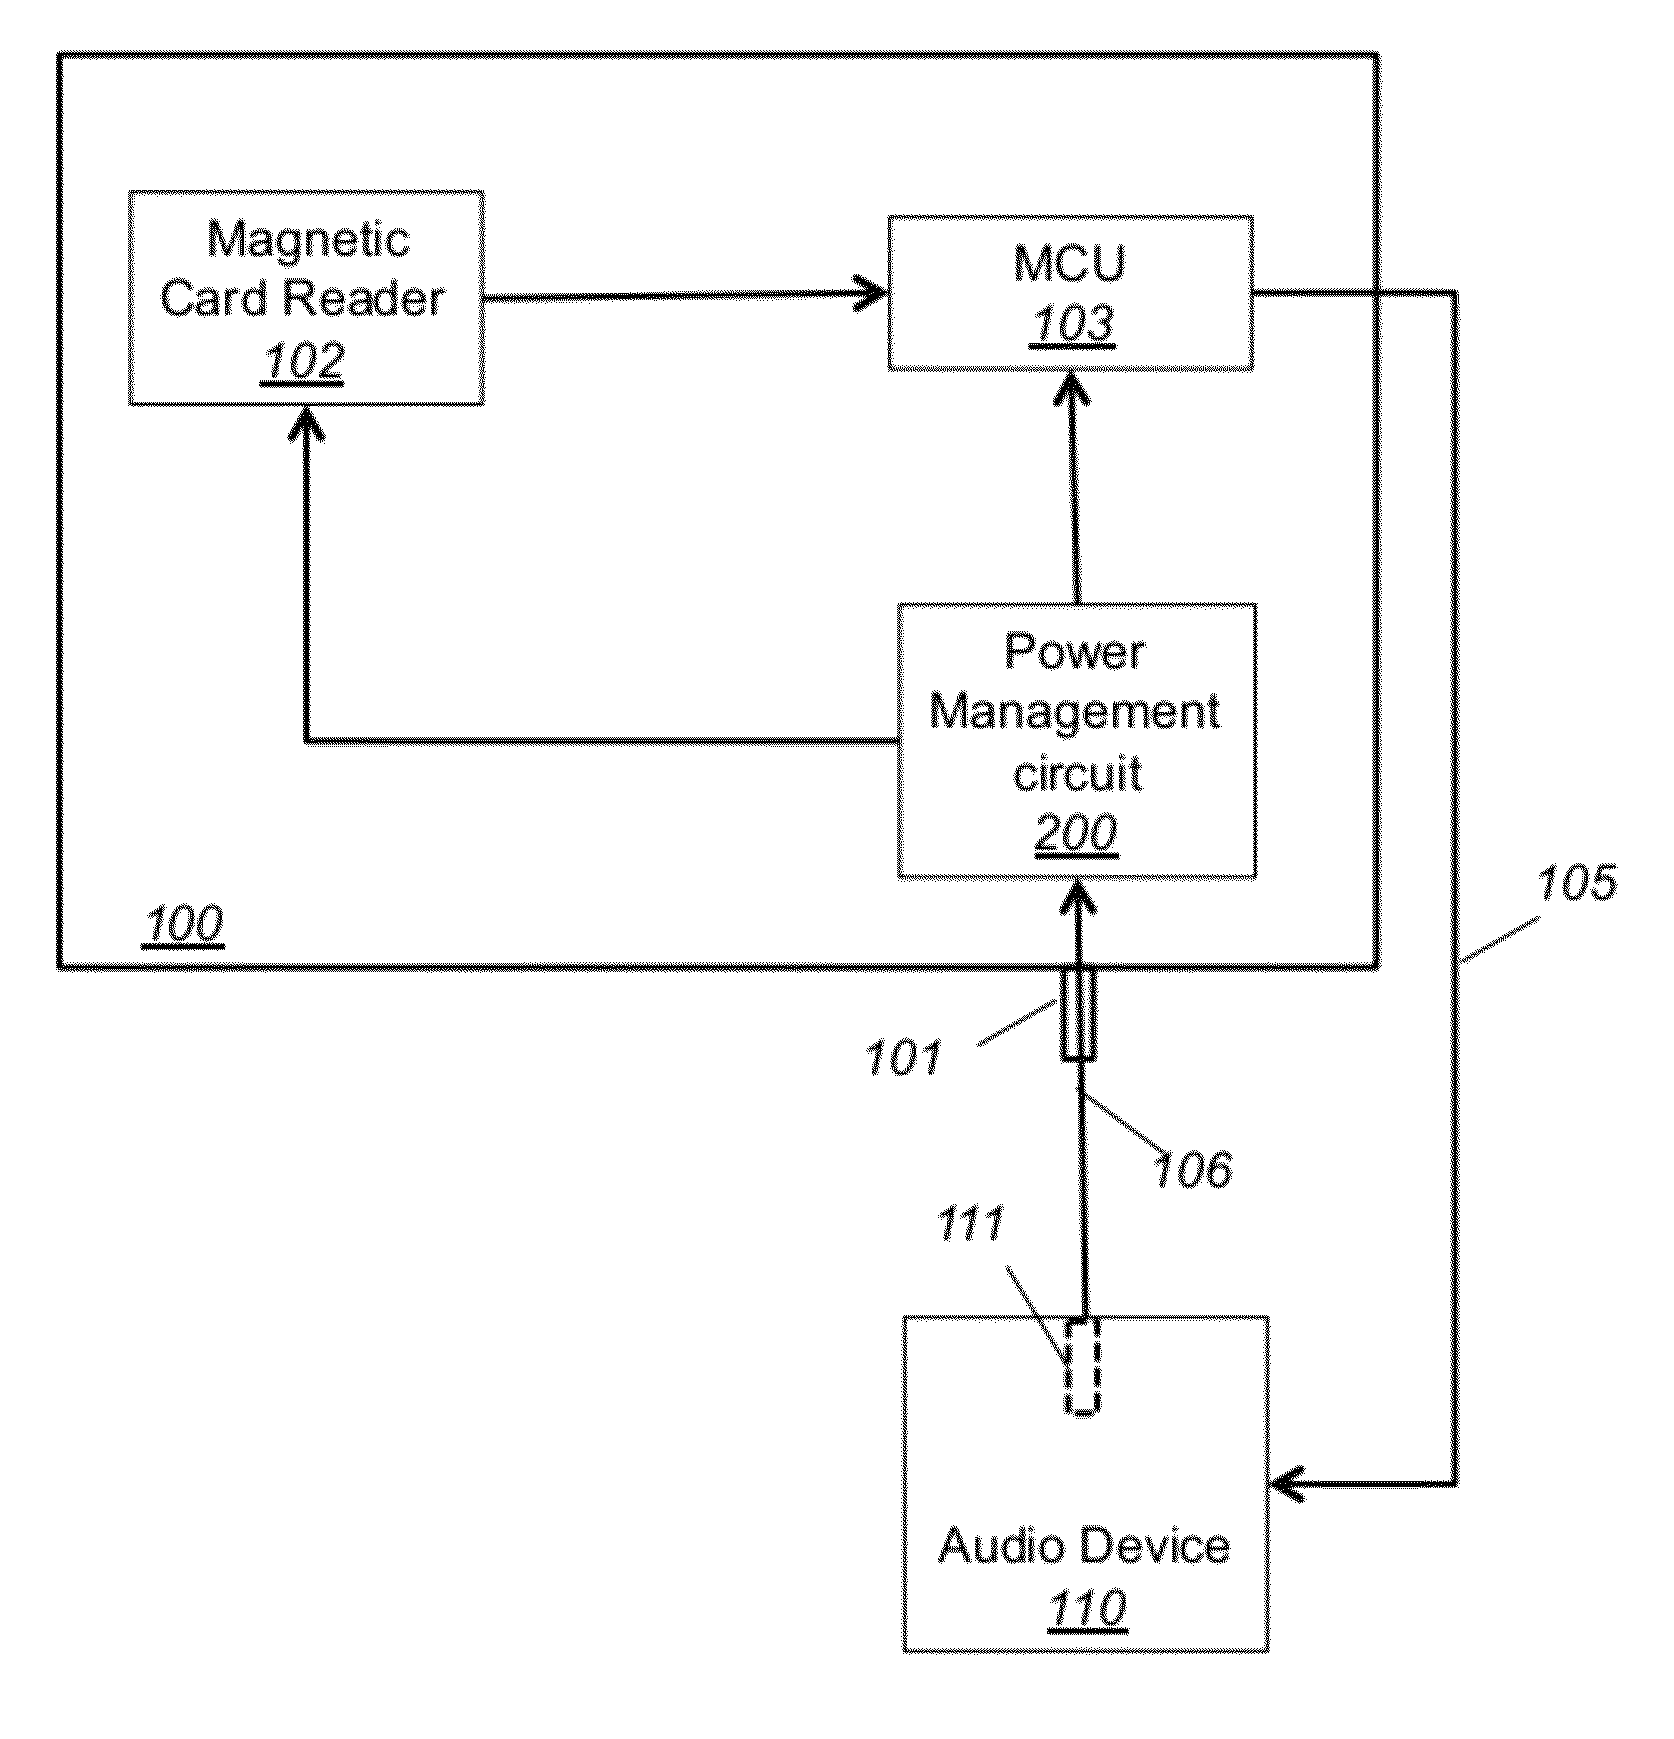 Power management circuitry in peripheral accessories of audio devices